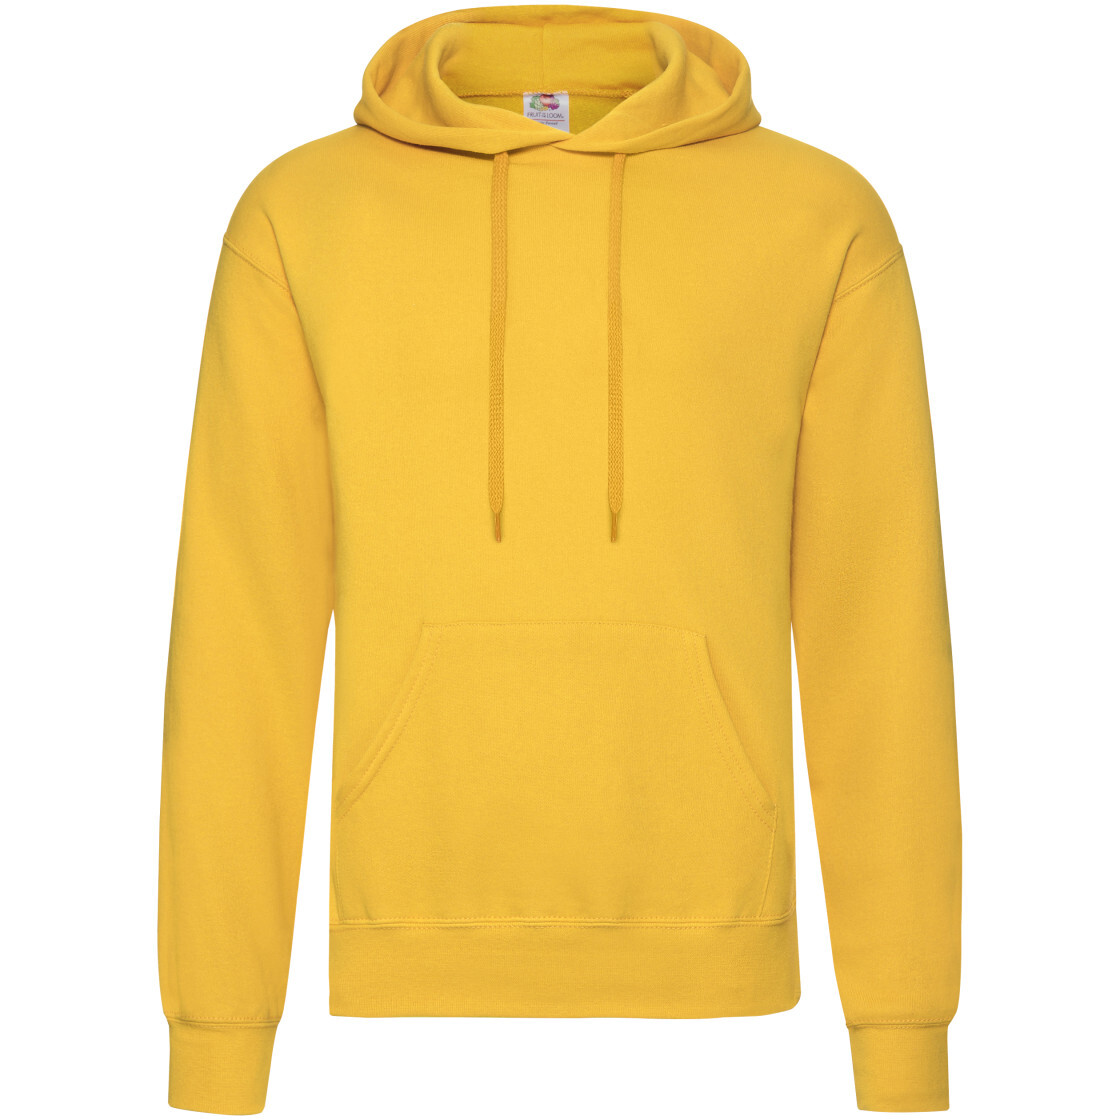 Fruit Of The Loom 62208 Mens Classic Hooded Sweatshirt from Lawson HIS